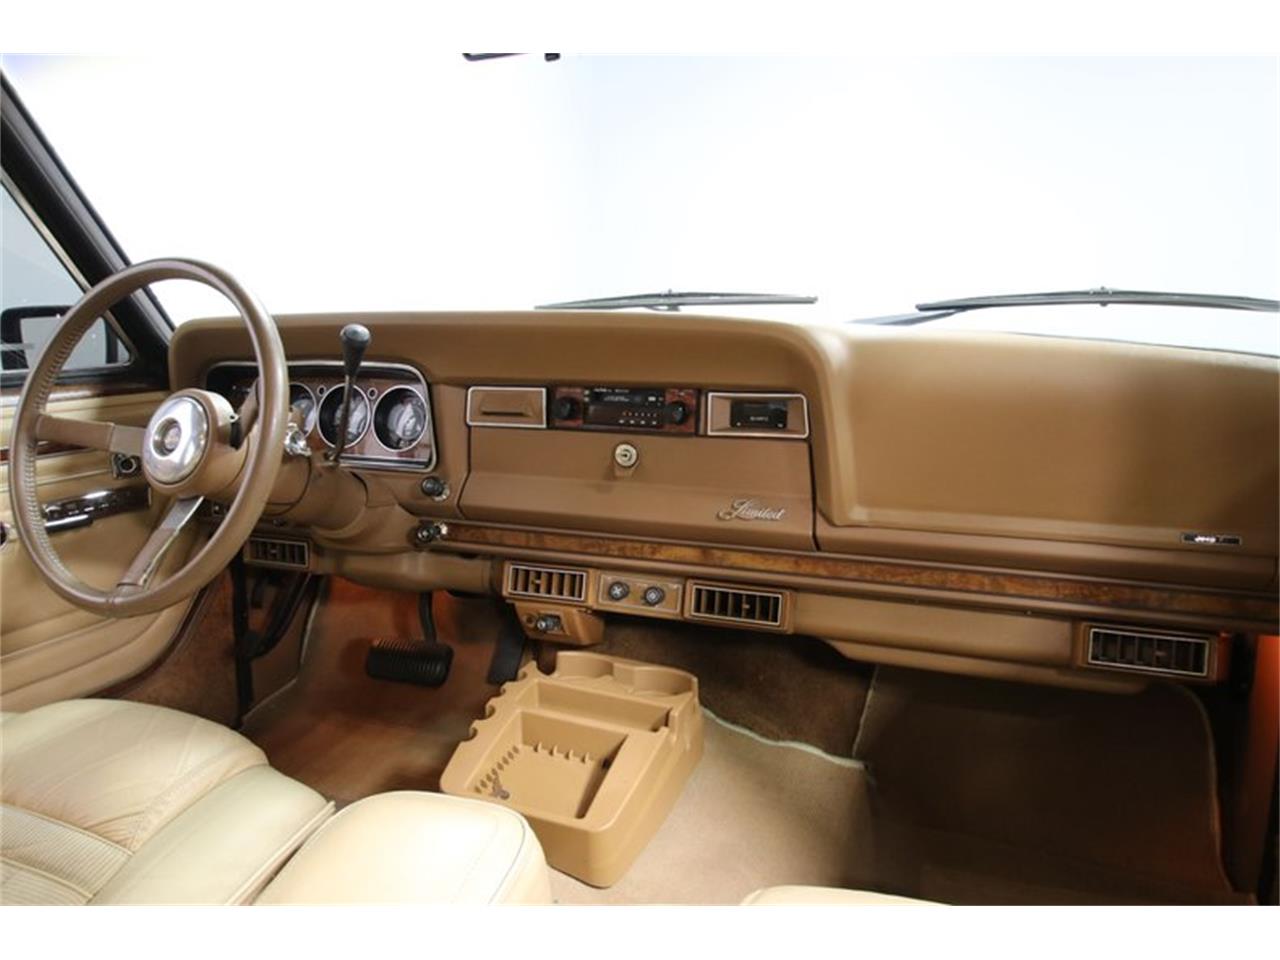 1981 Jeep Wagoneer for sale in Concord, NC – photo 60